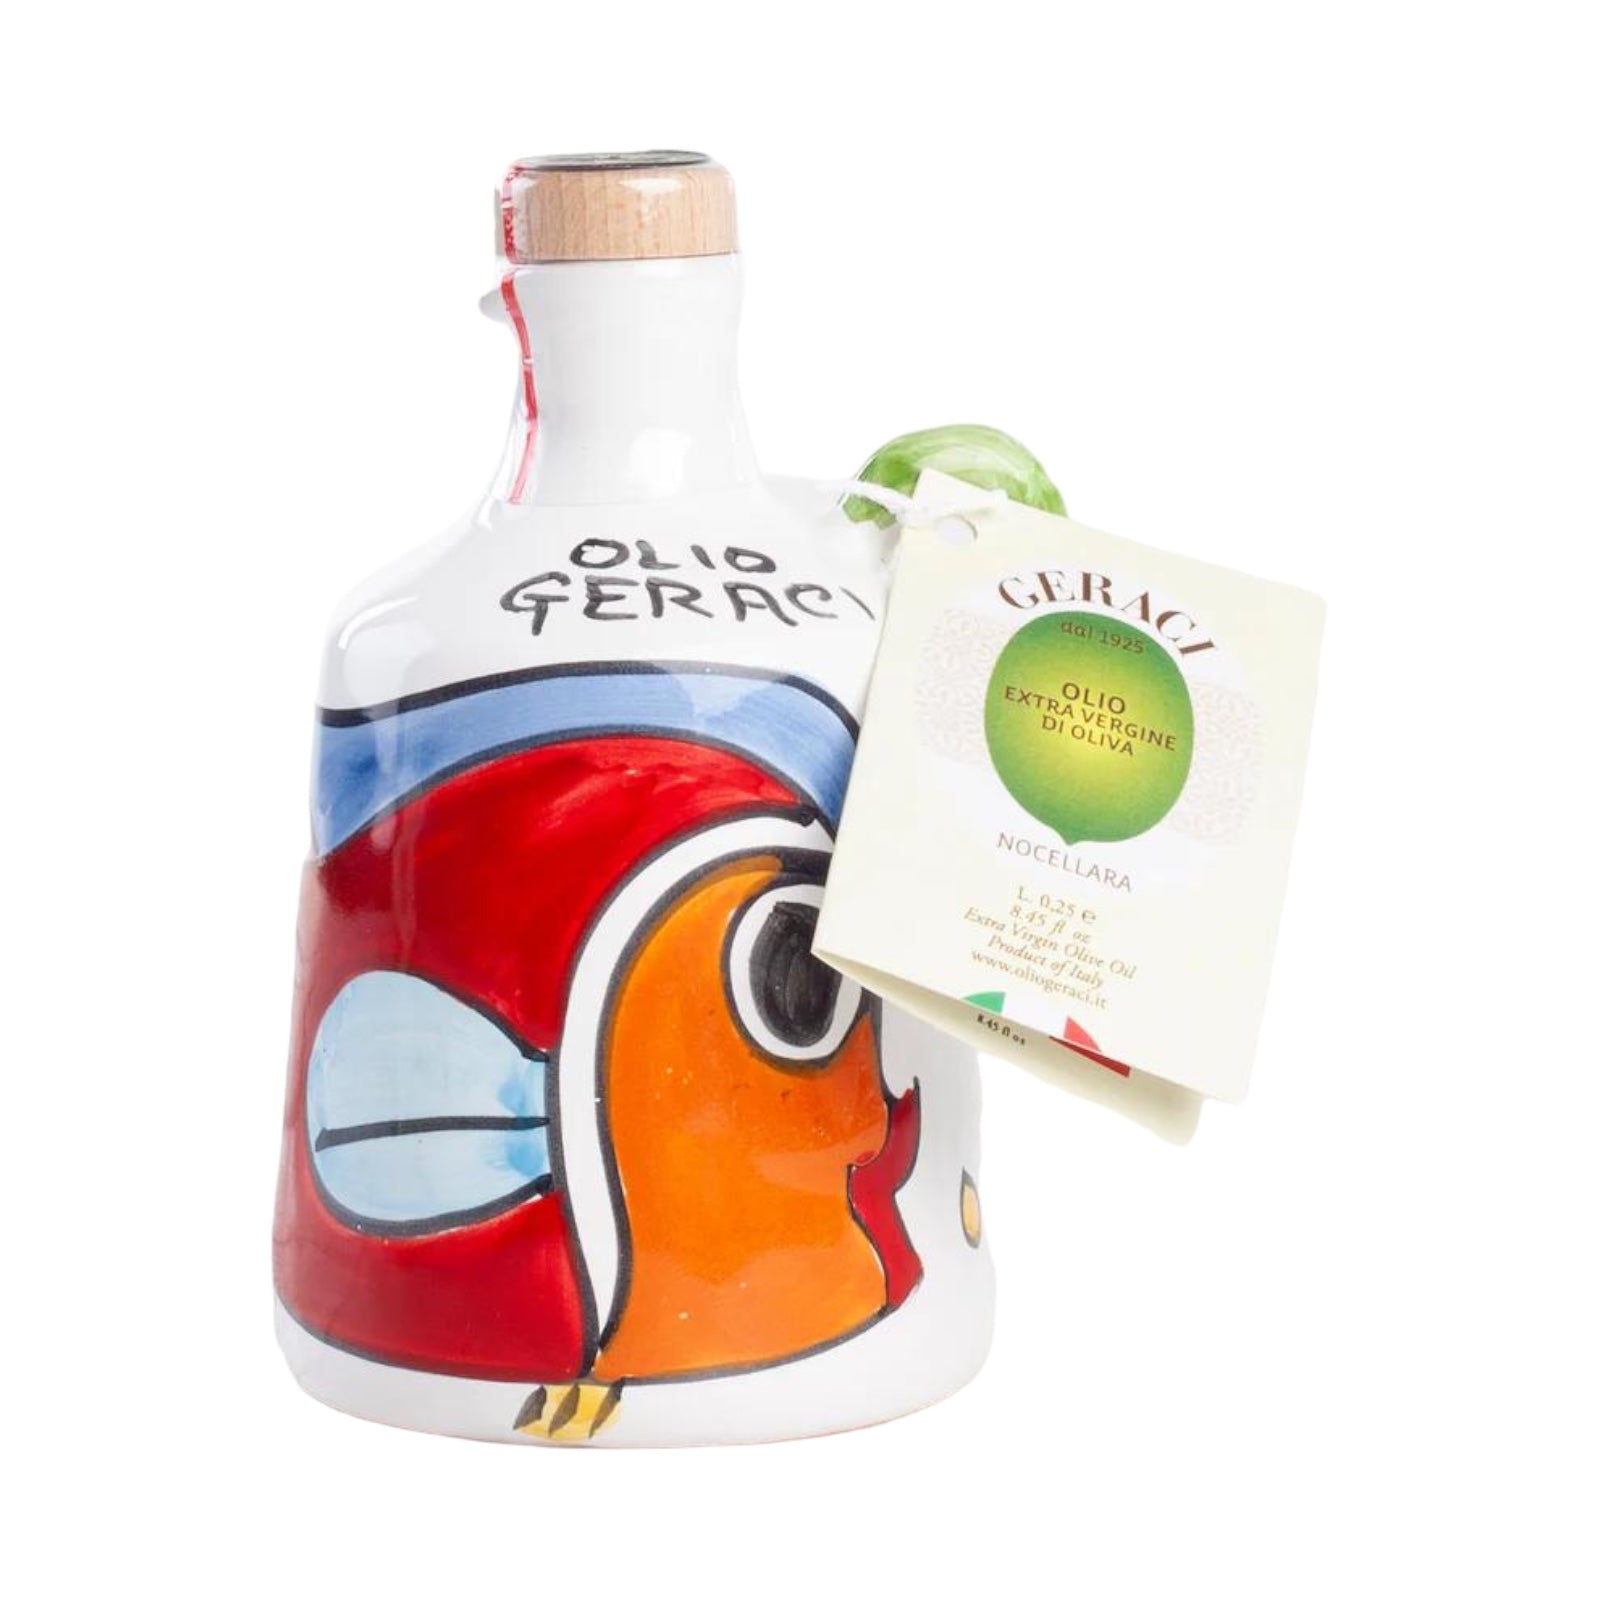 Extra Virgin Olive Oil Cold Pressed By Geraci, Ceramic By Nino Parrucca